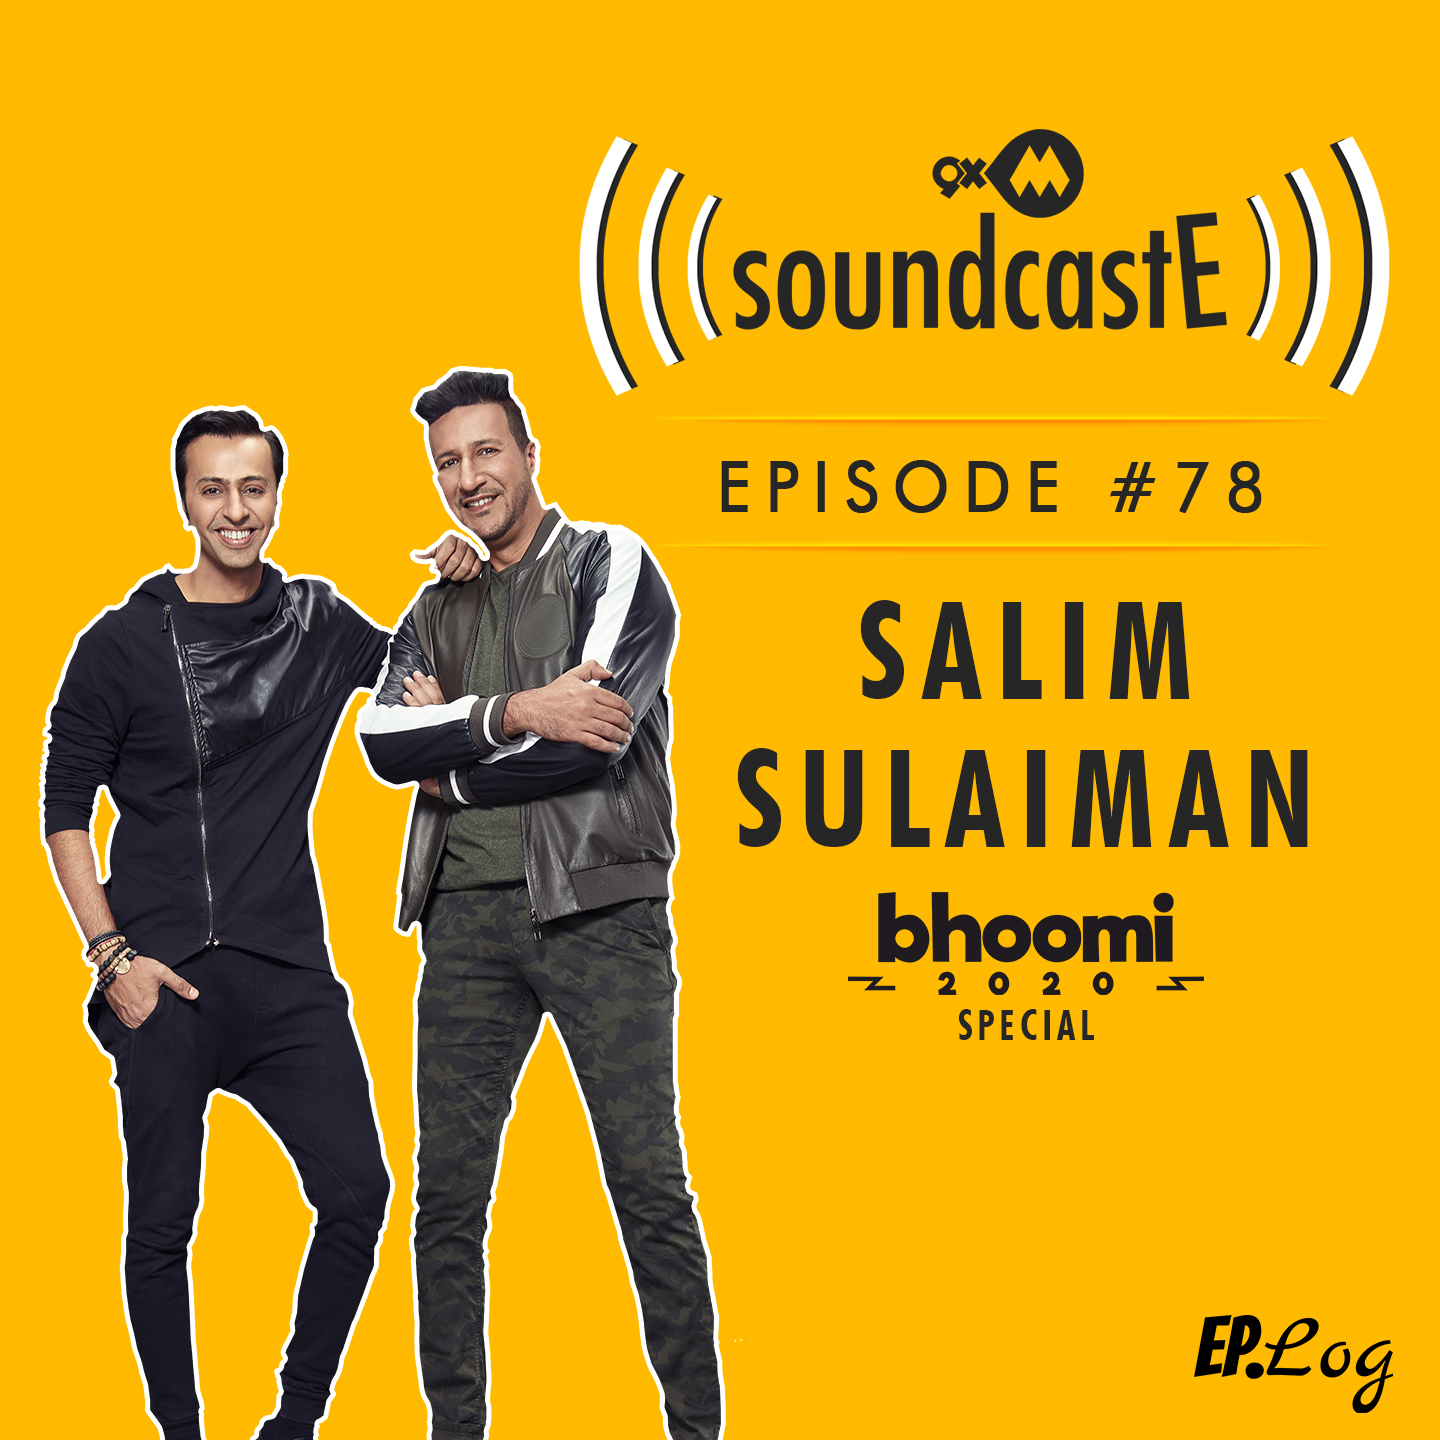 Ep.78: 9XM SoundcastE ft. Salim-Sulaiman Bhoomi 2020 Special